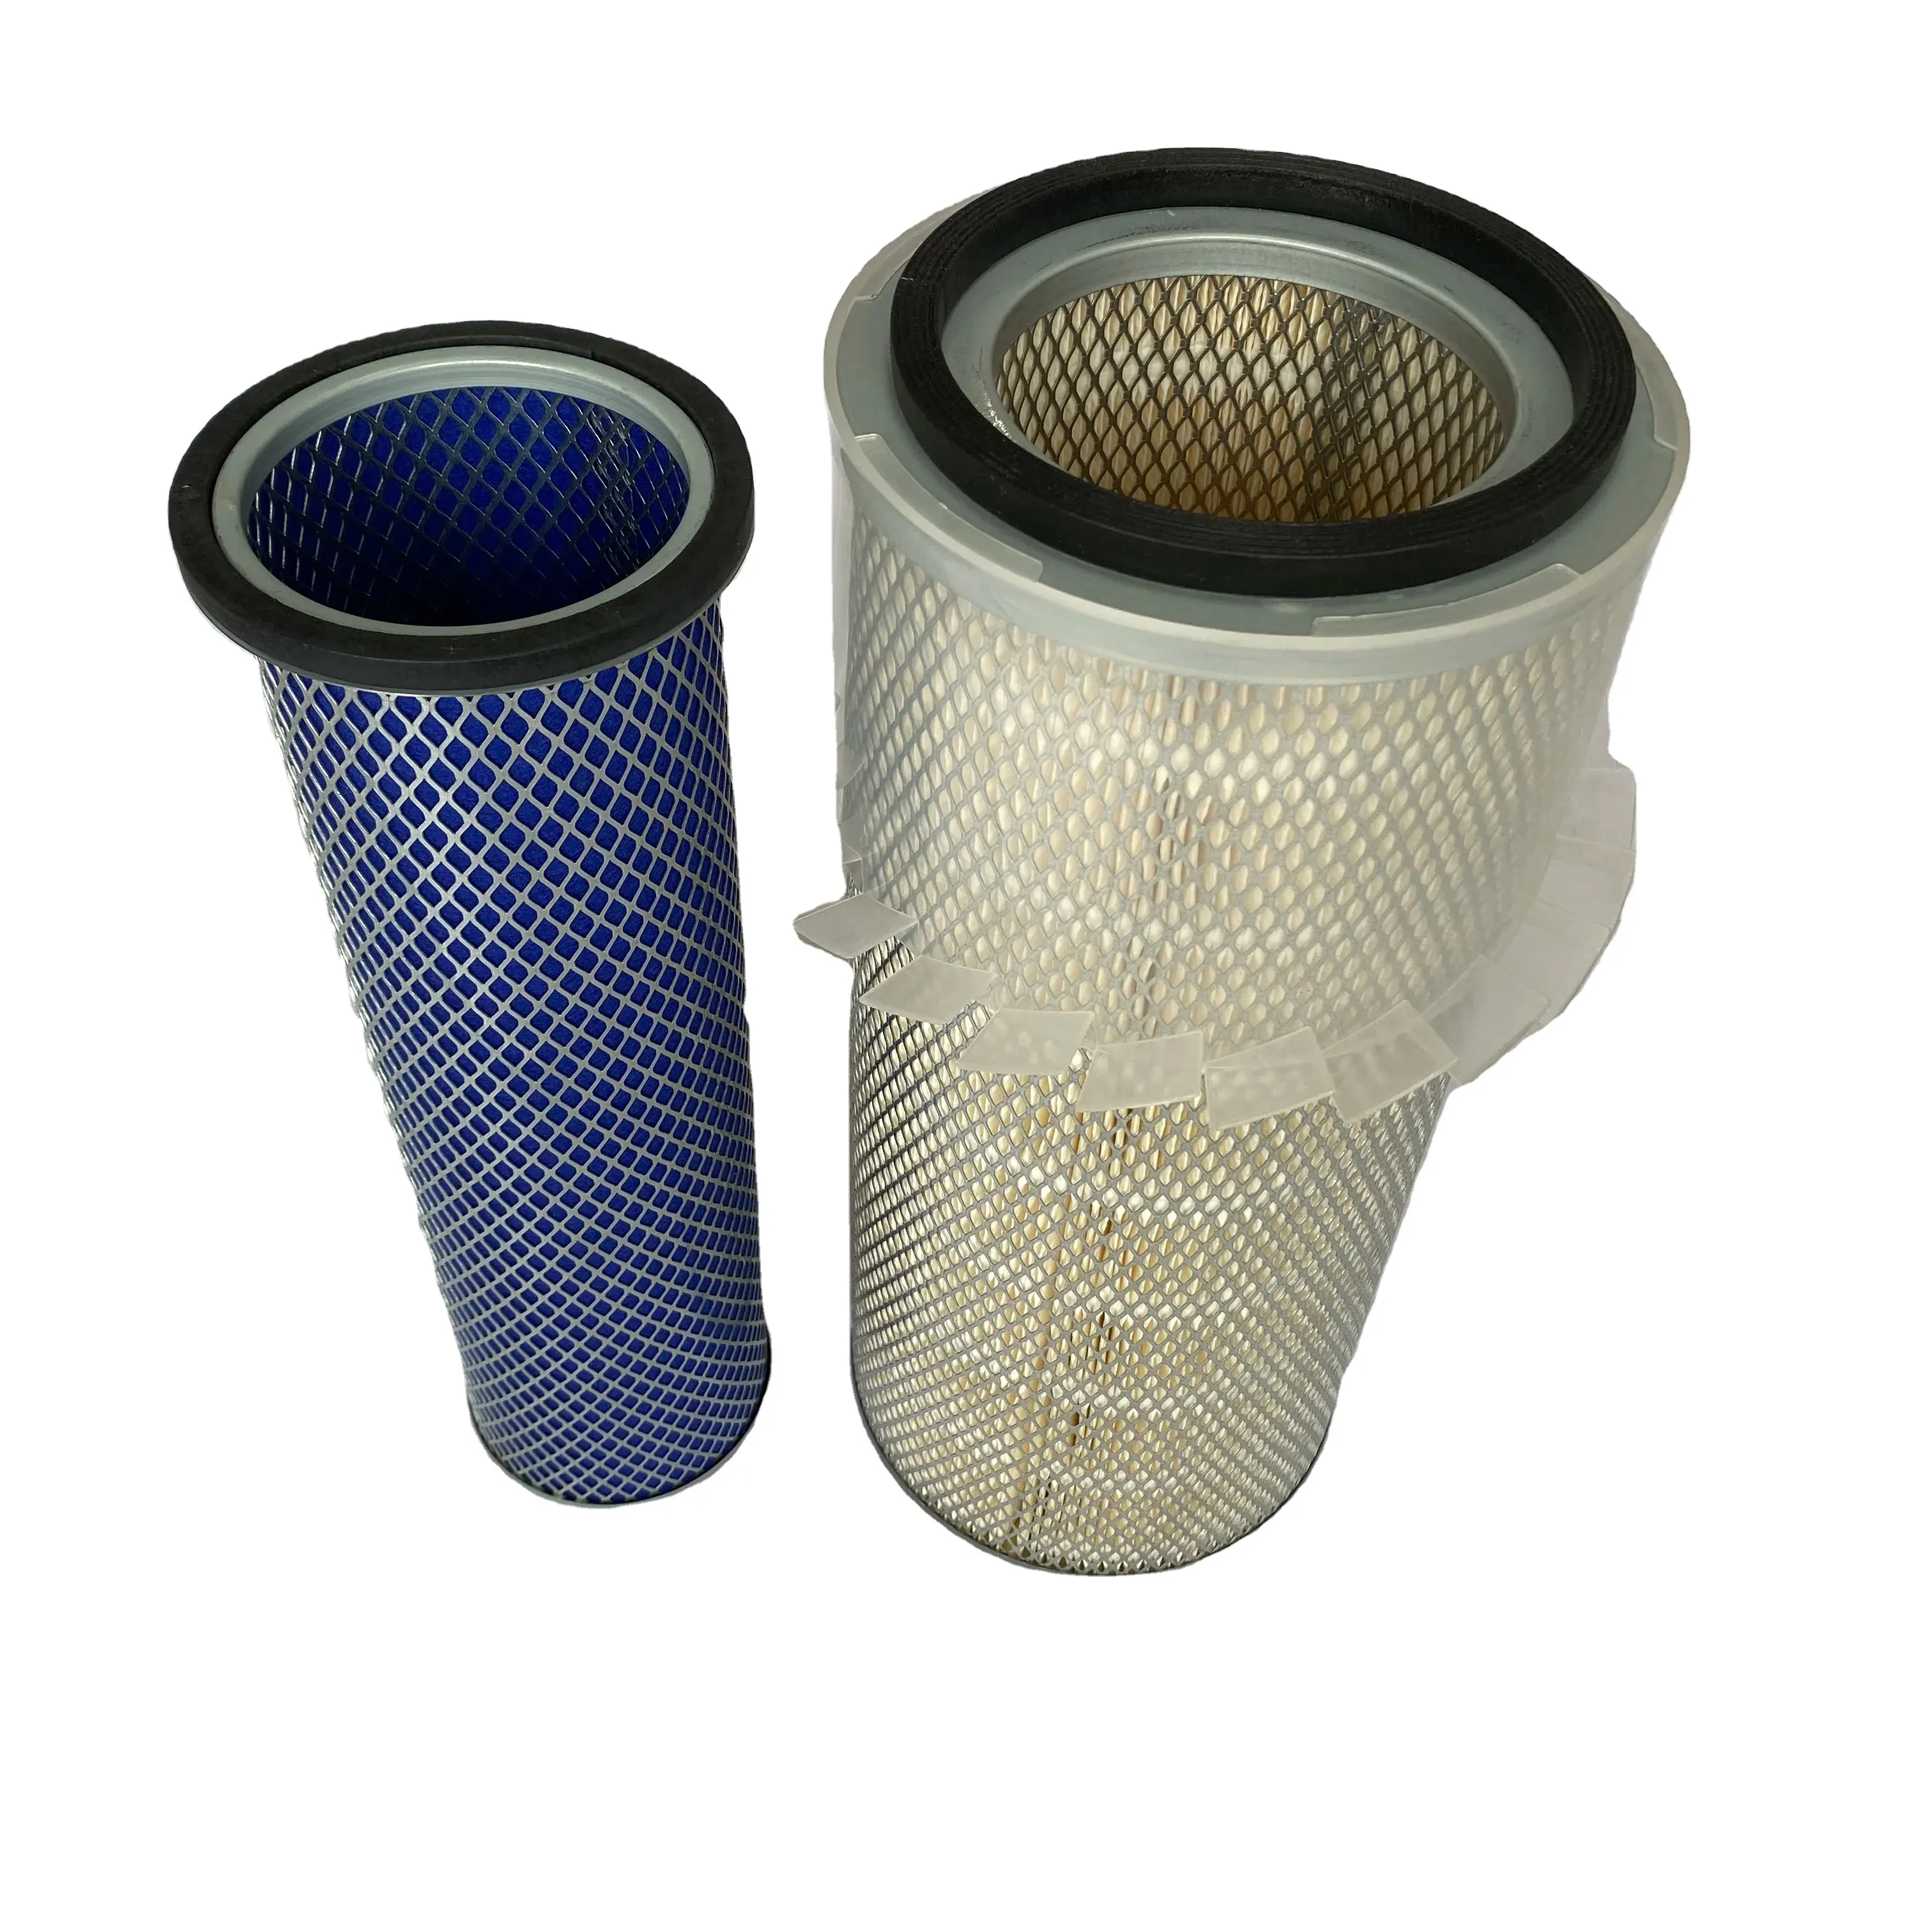 filtration equipment Suitable for clean rooms air filter Dusting of paint spraying exhaust gases air dust collector filter